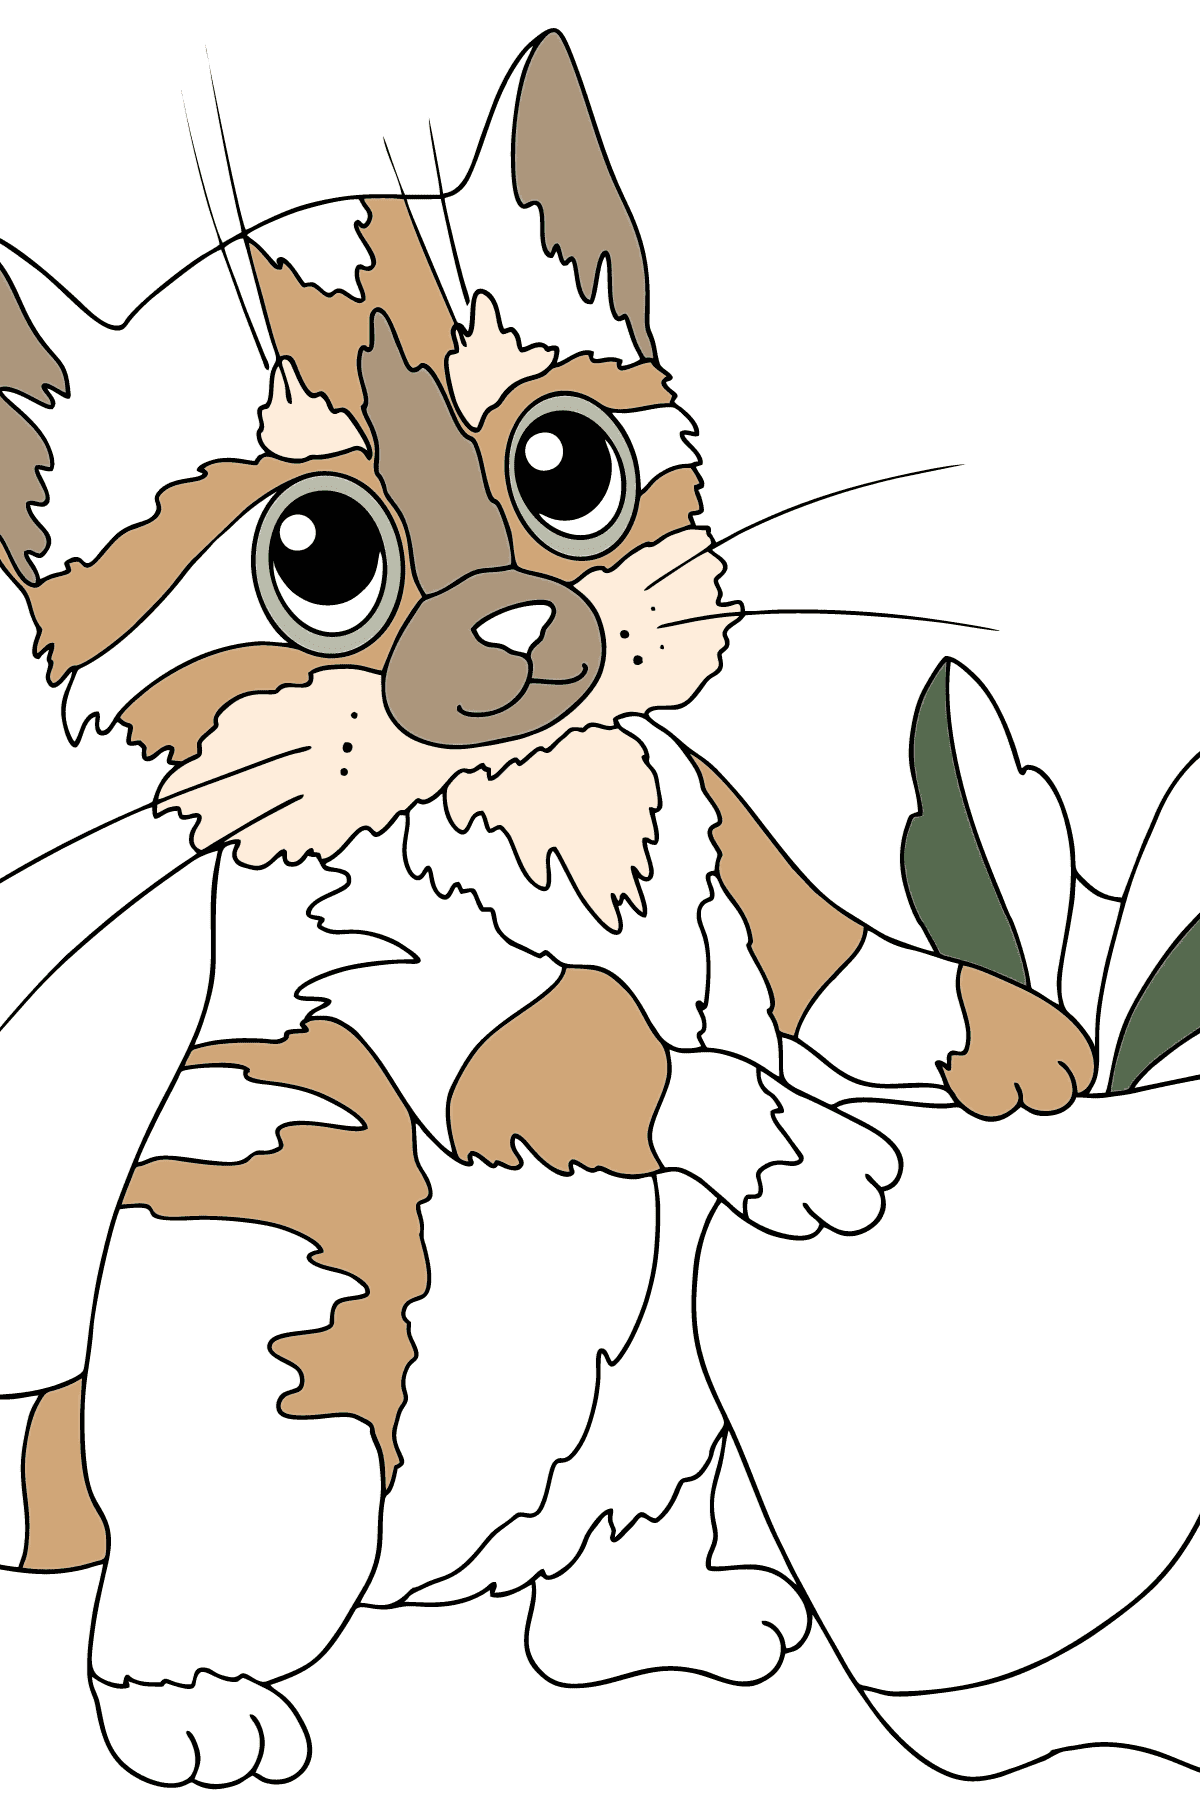 Pet Cat coloring page - Coloring Pages for Kids